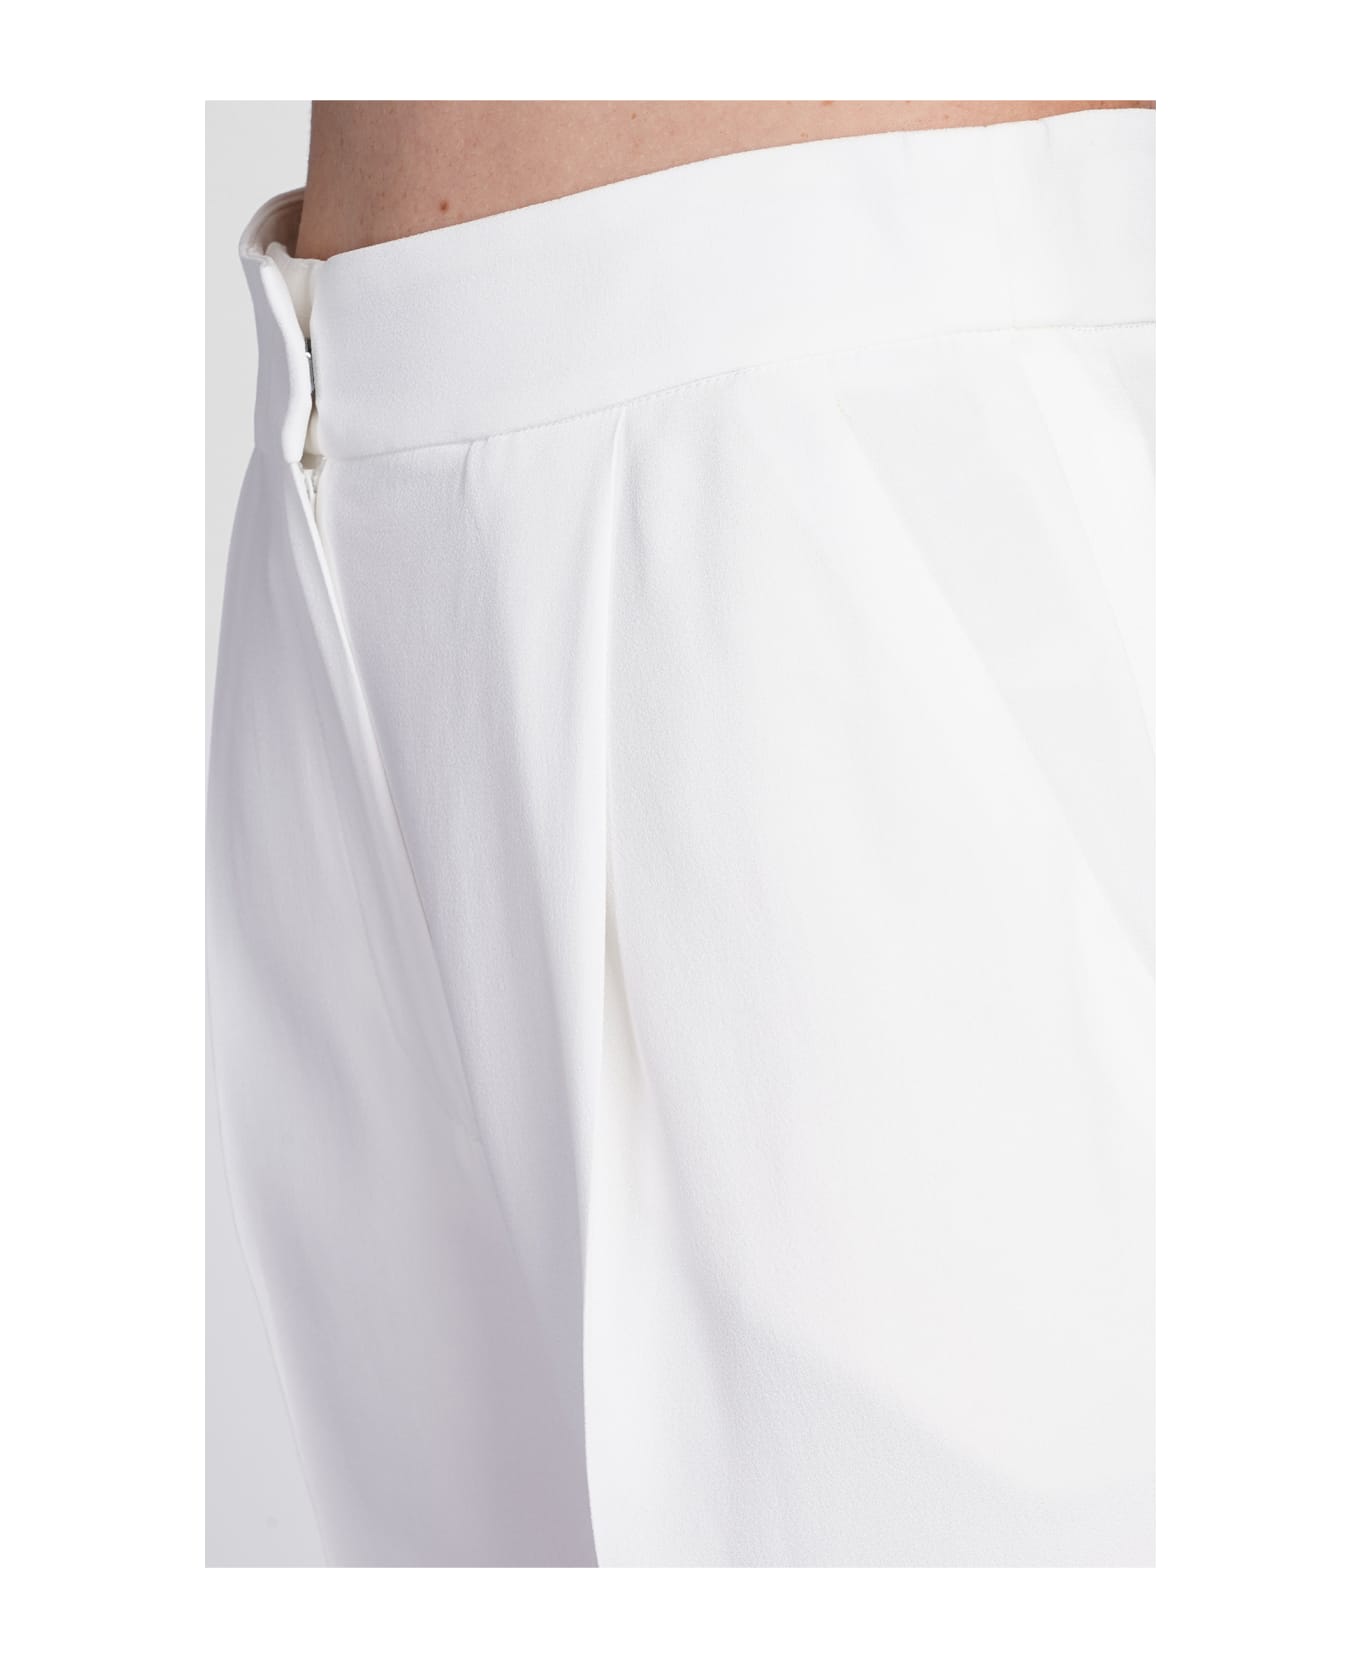 Emporio Armani Darted High-waist Trousers - white ボトムス